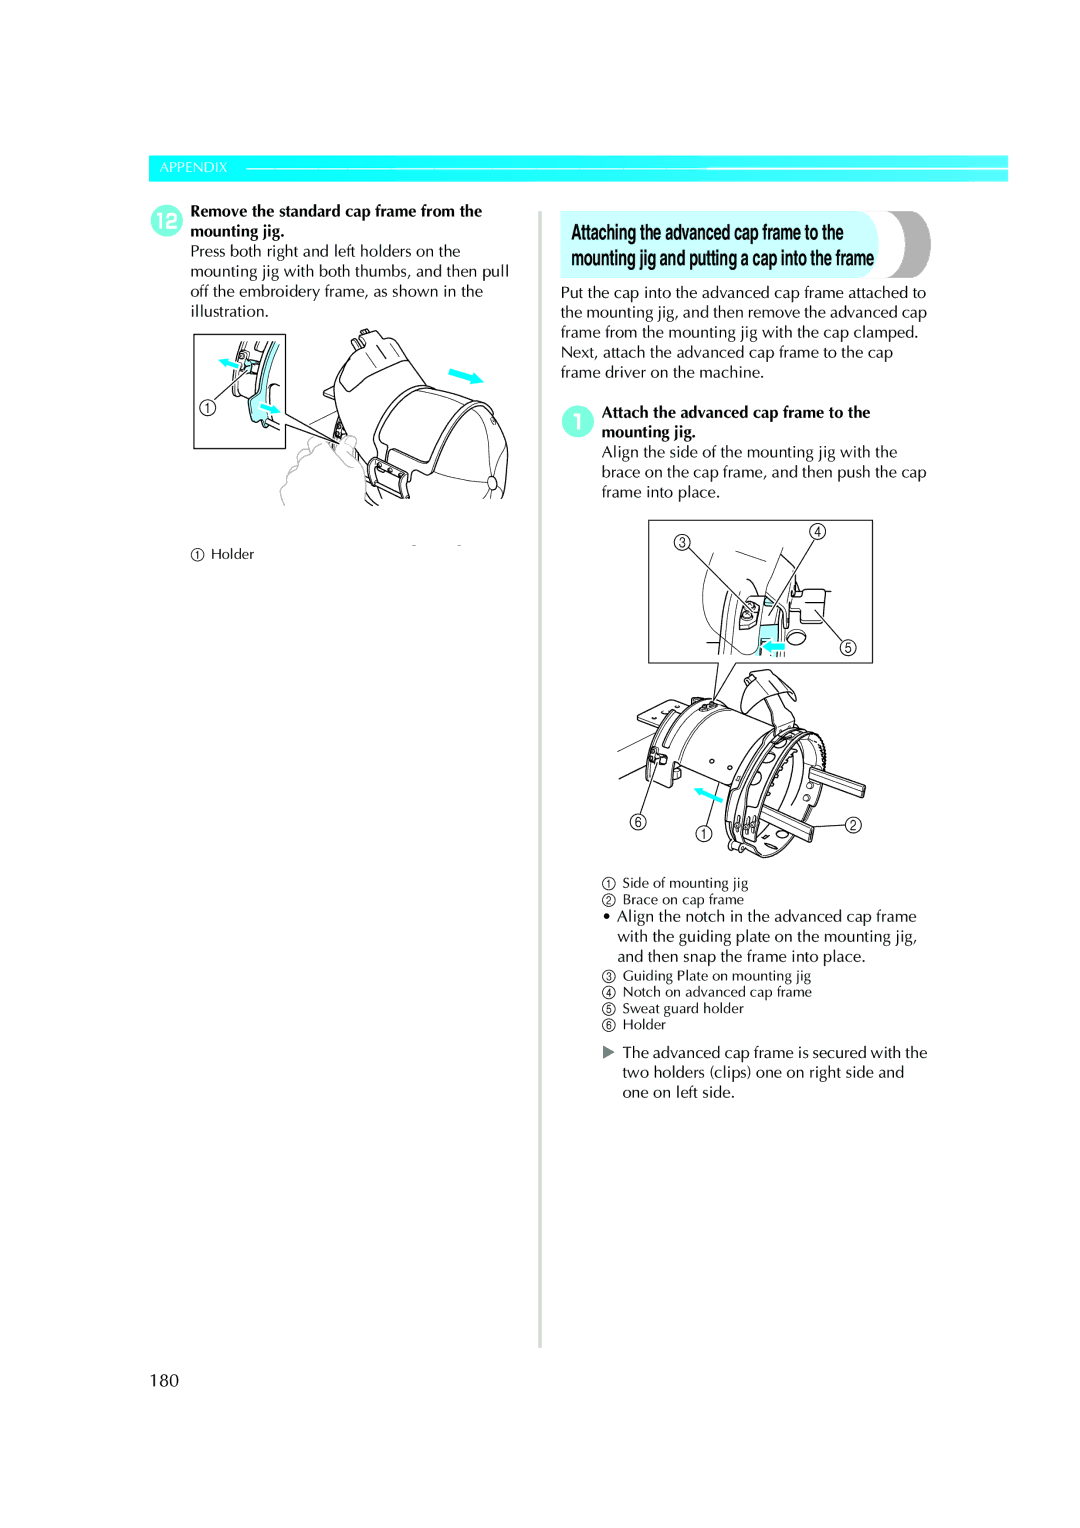 Brother PR-620 operation manual 180, BRemove the standard cap frame from the mounting jig 